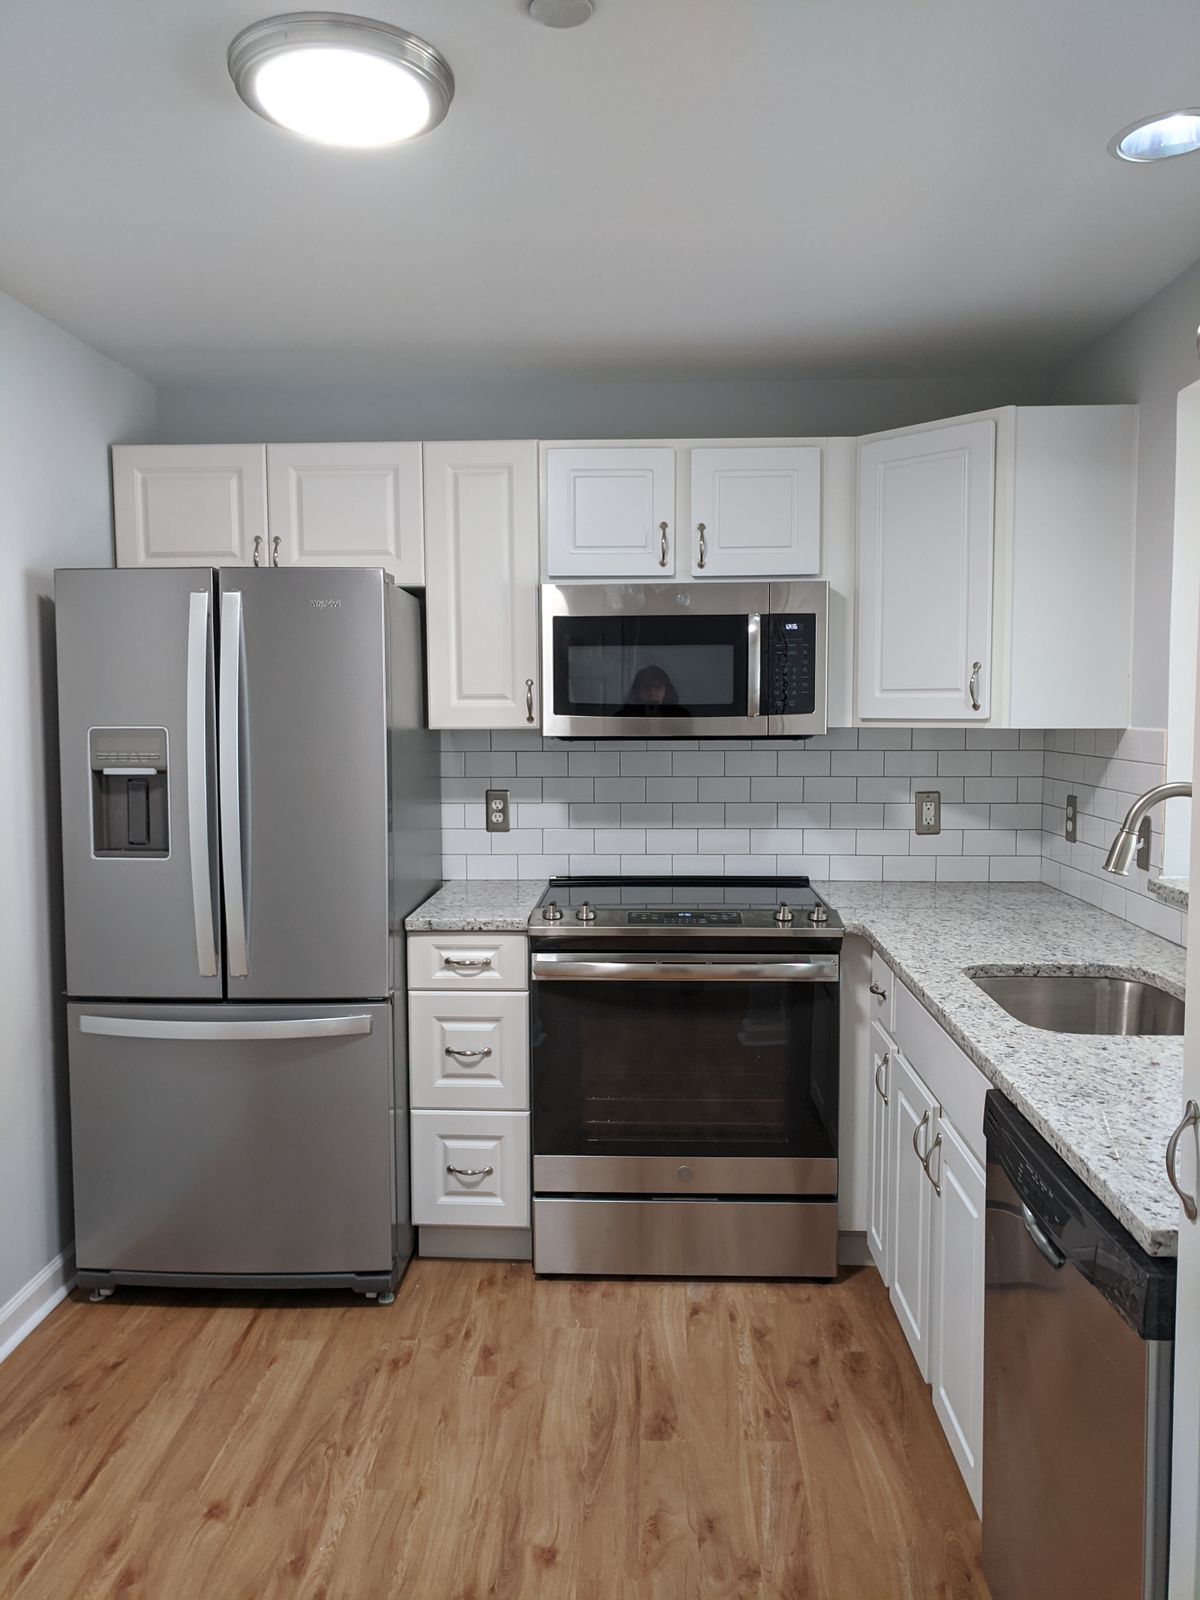 Senior resident in a well-designed kitchen with modern appliances at Lions Gate community.